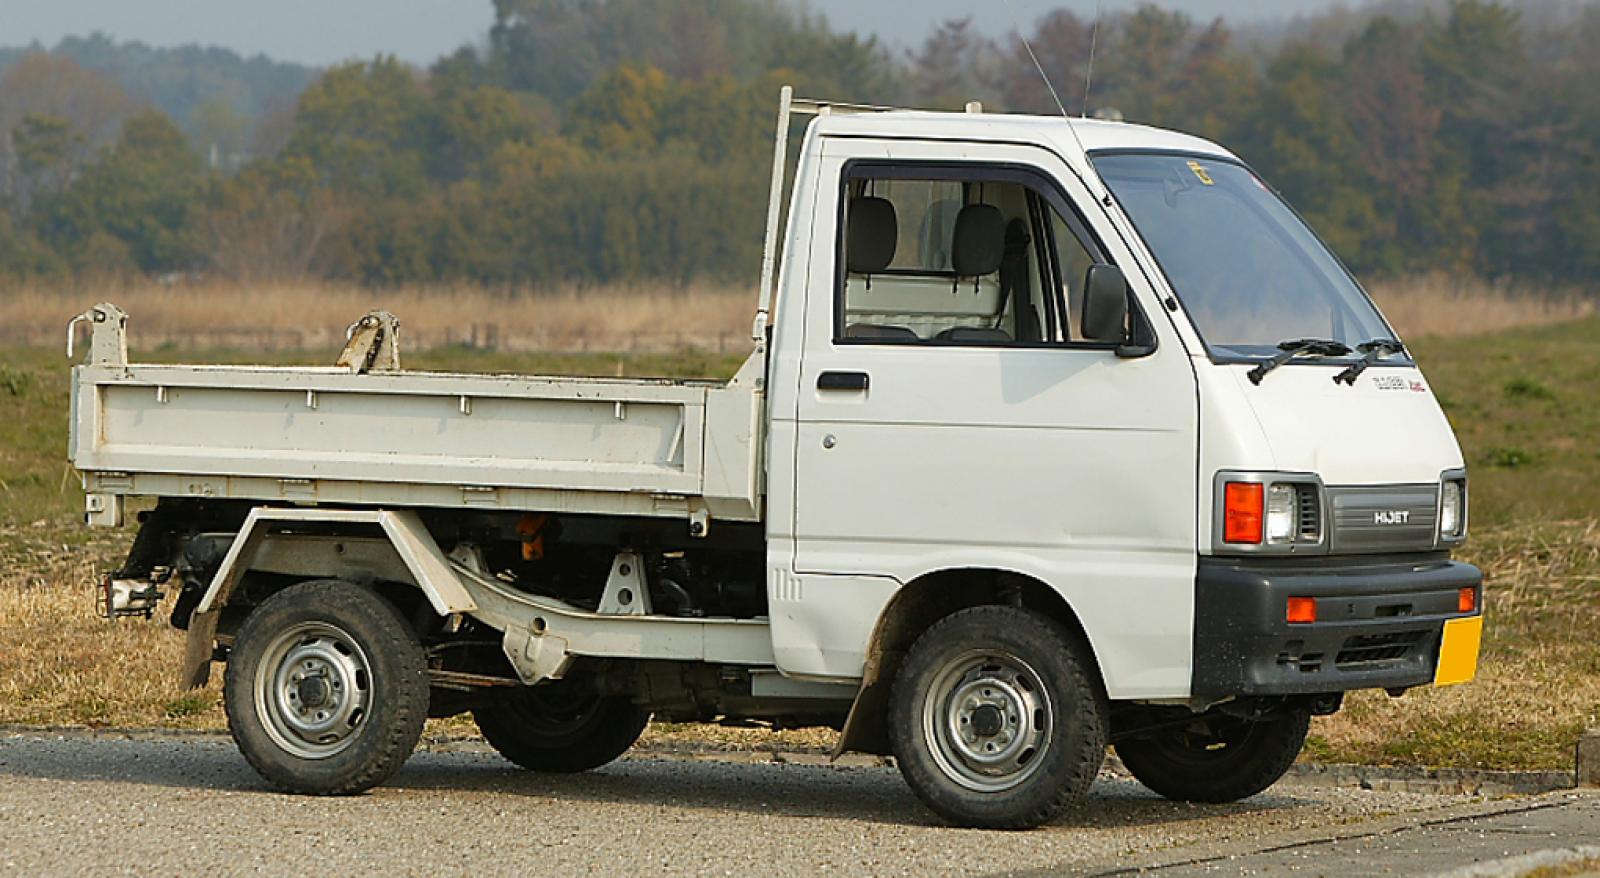 daihatsu Hijet is the best vehicle to see places around the country!